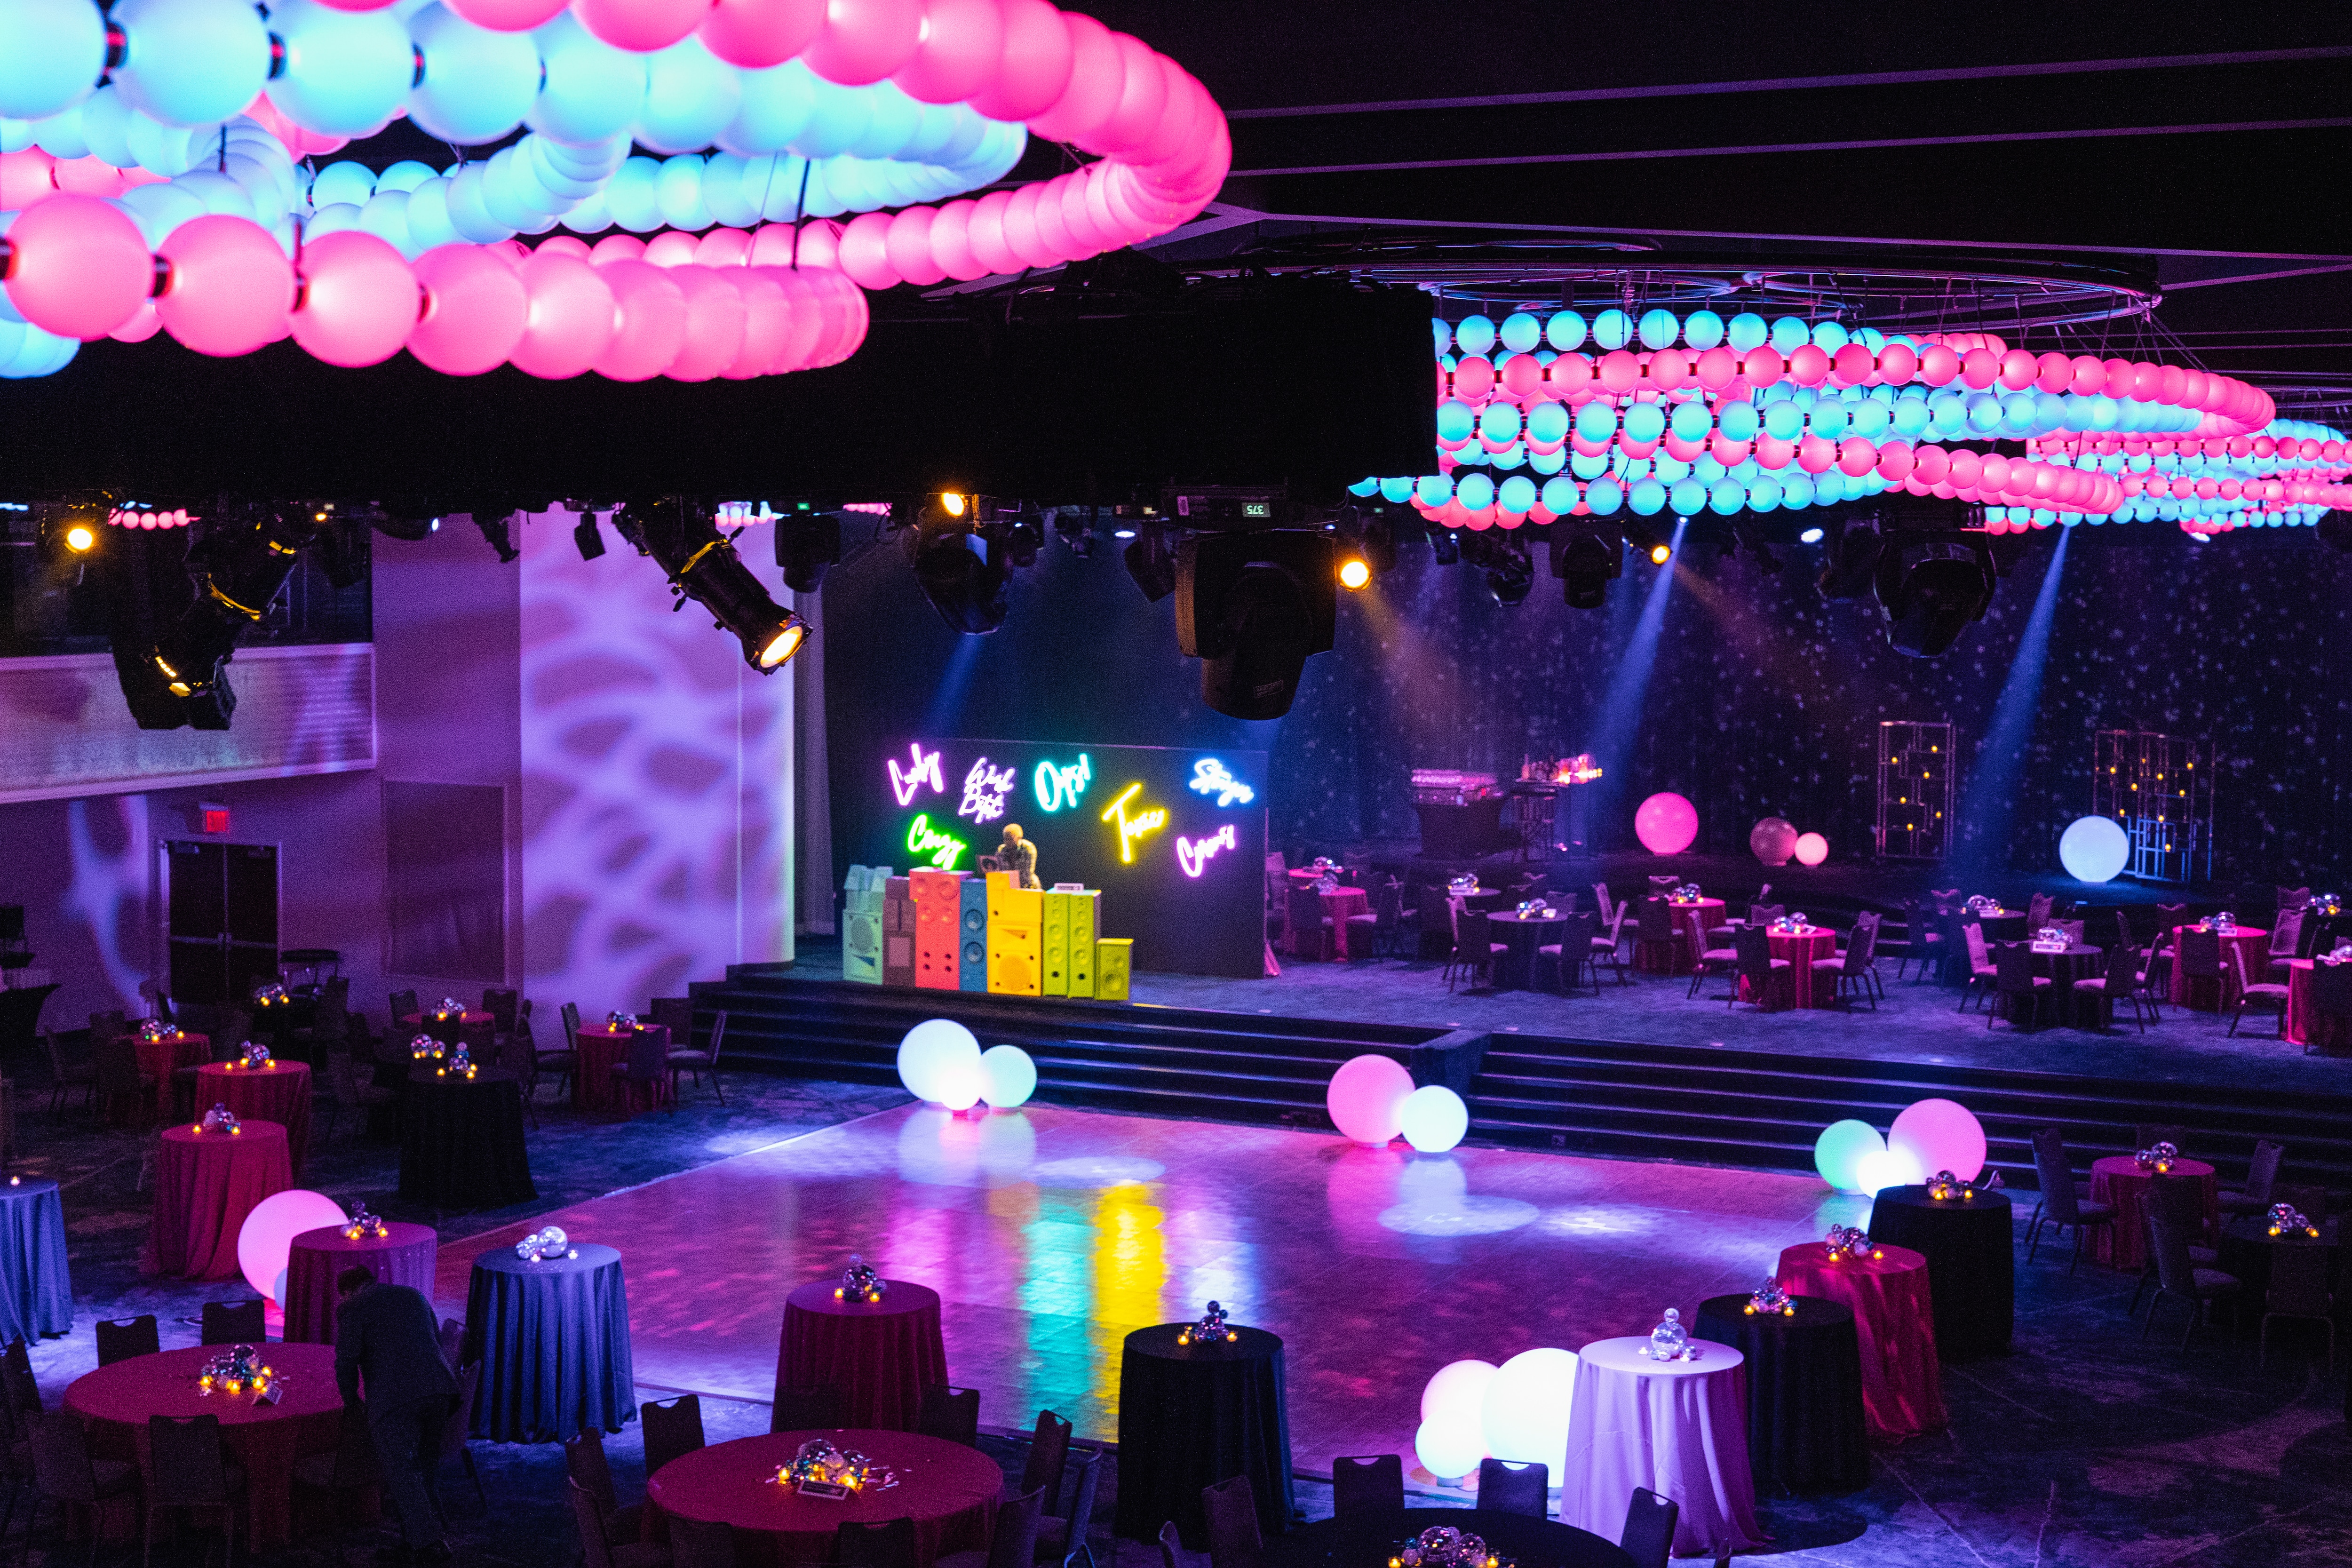 Event setup with dance floor